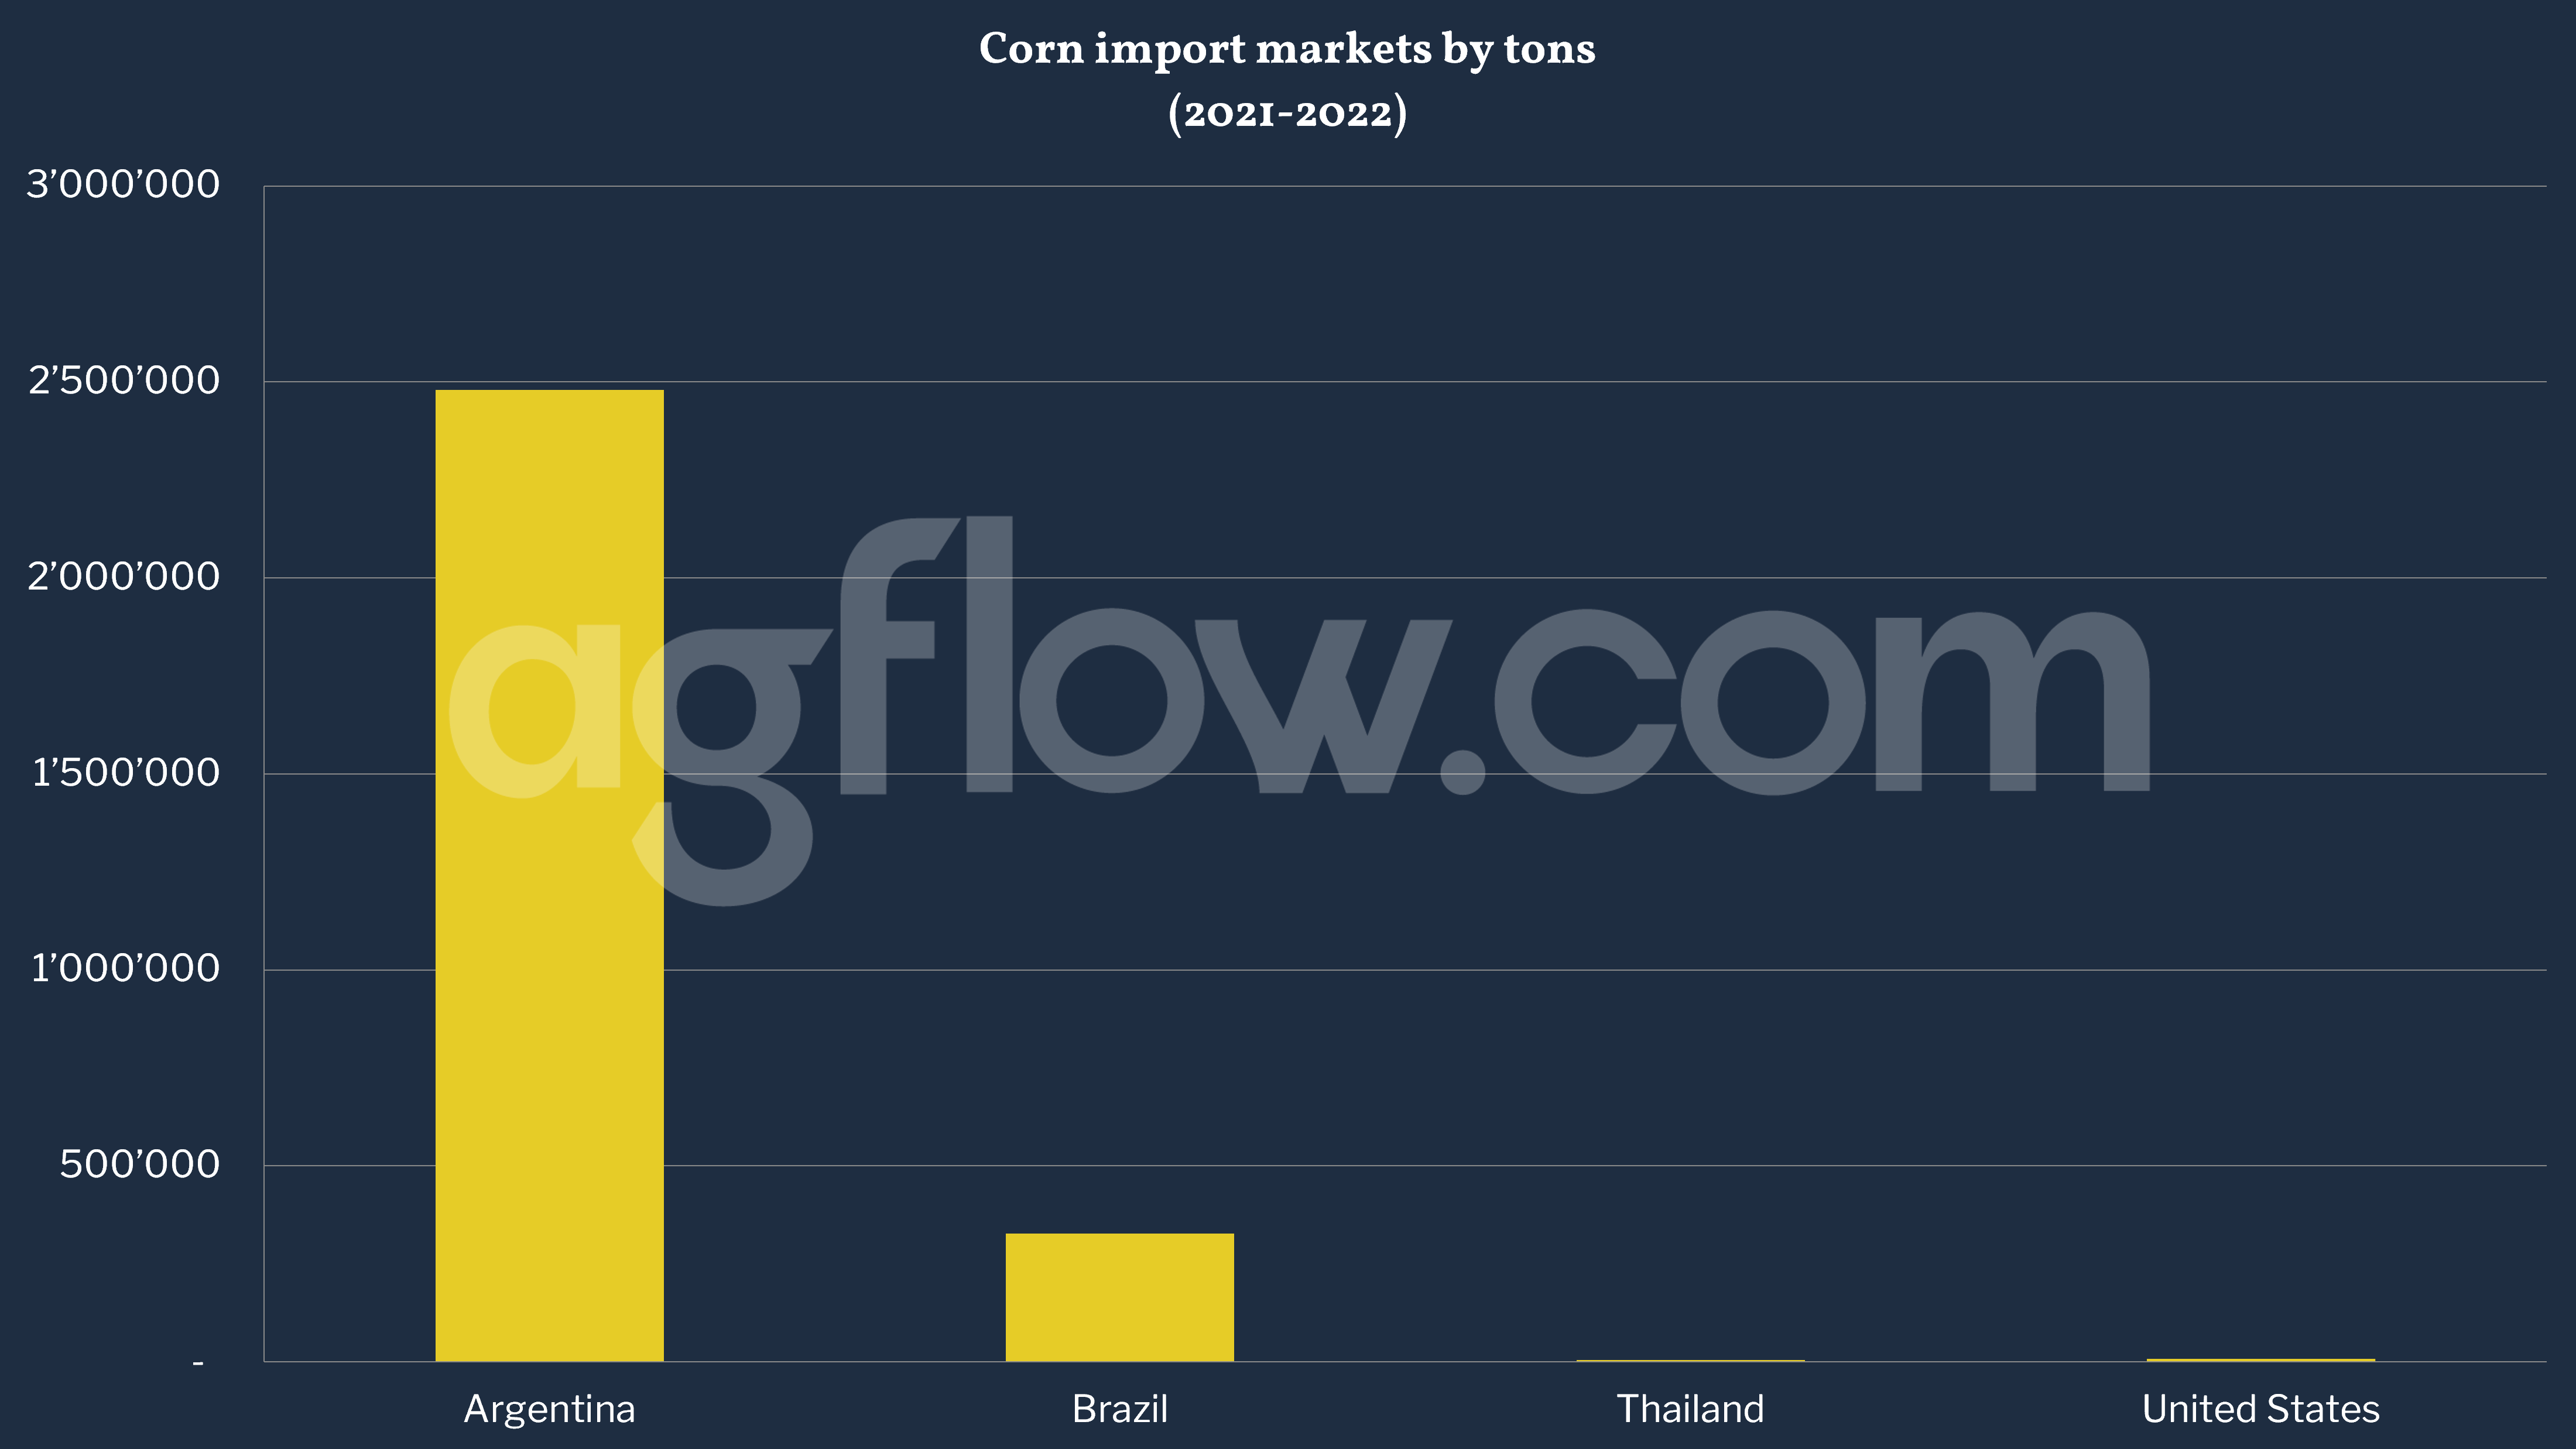 Malaysia Aims to Reduce Corn Import Independency